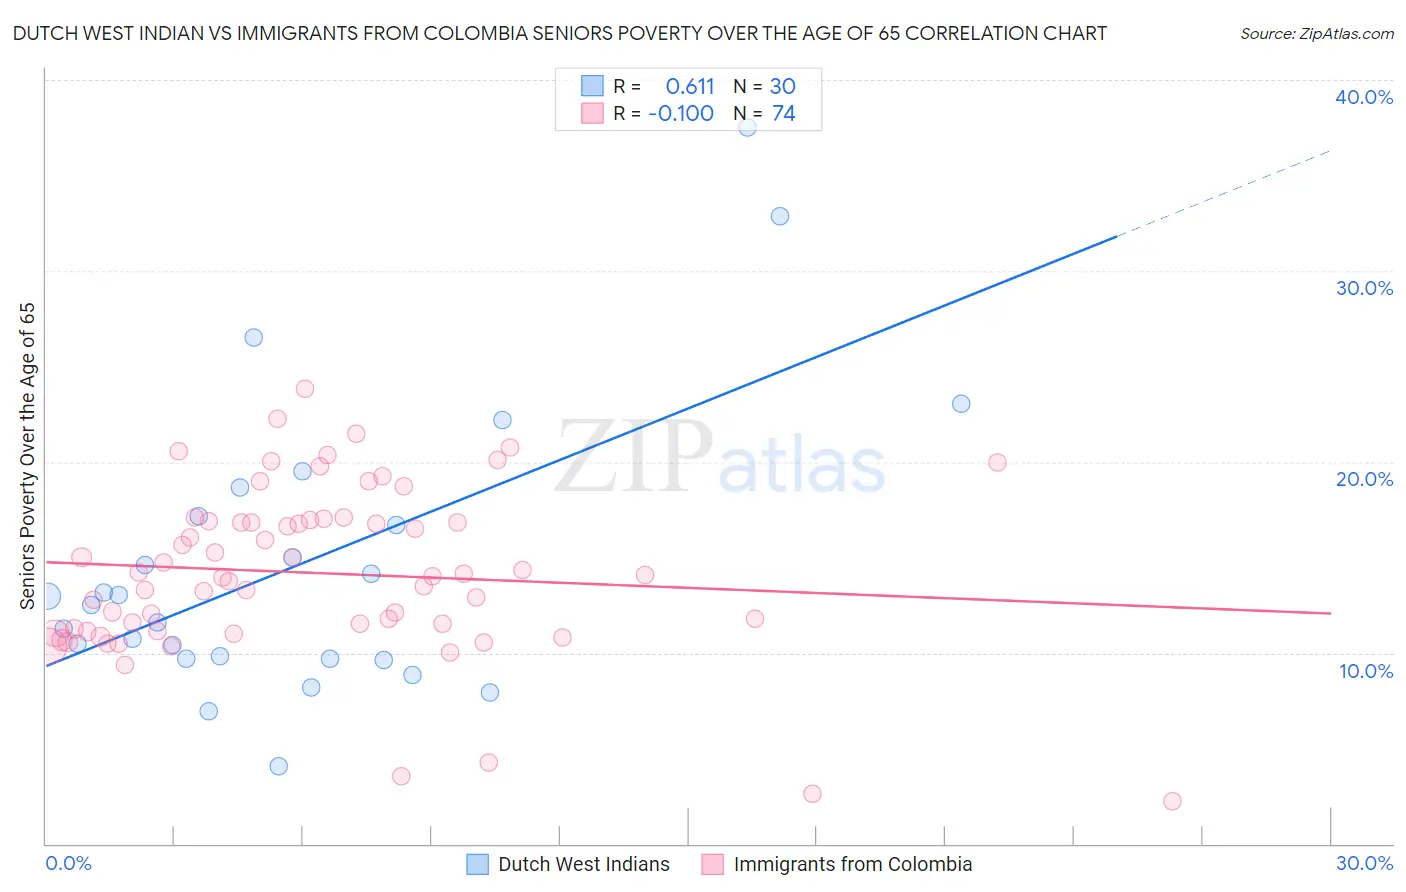 Dutch West Indian vs Immigrants from Colombia Seniors Poverty Over the Age of 65